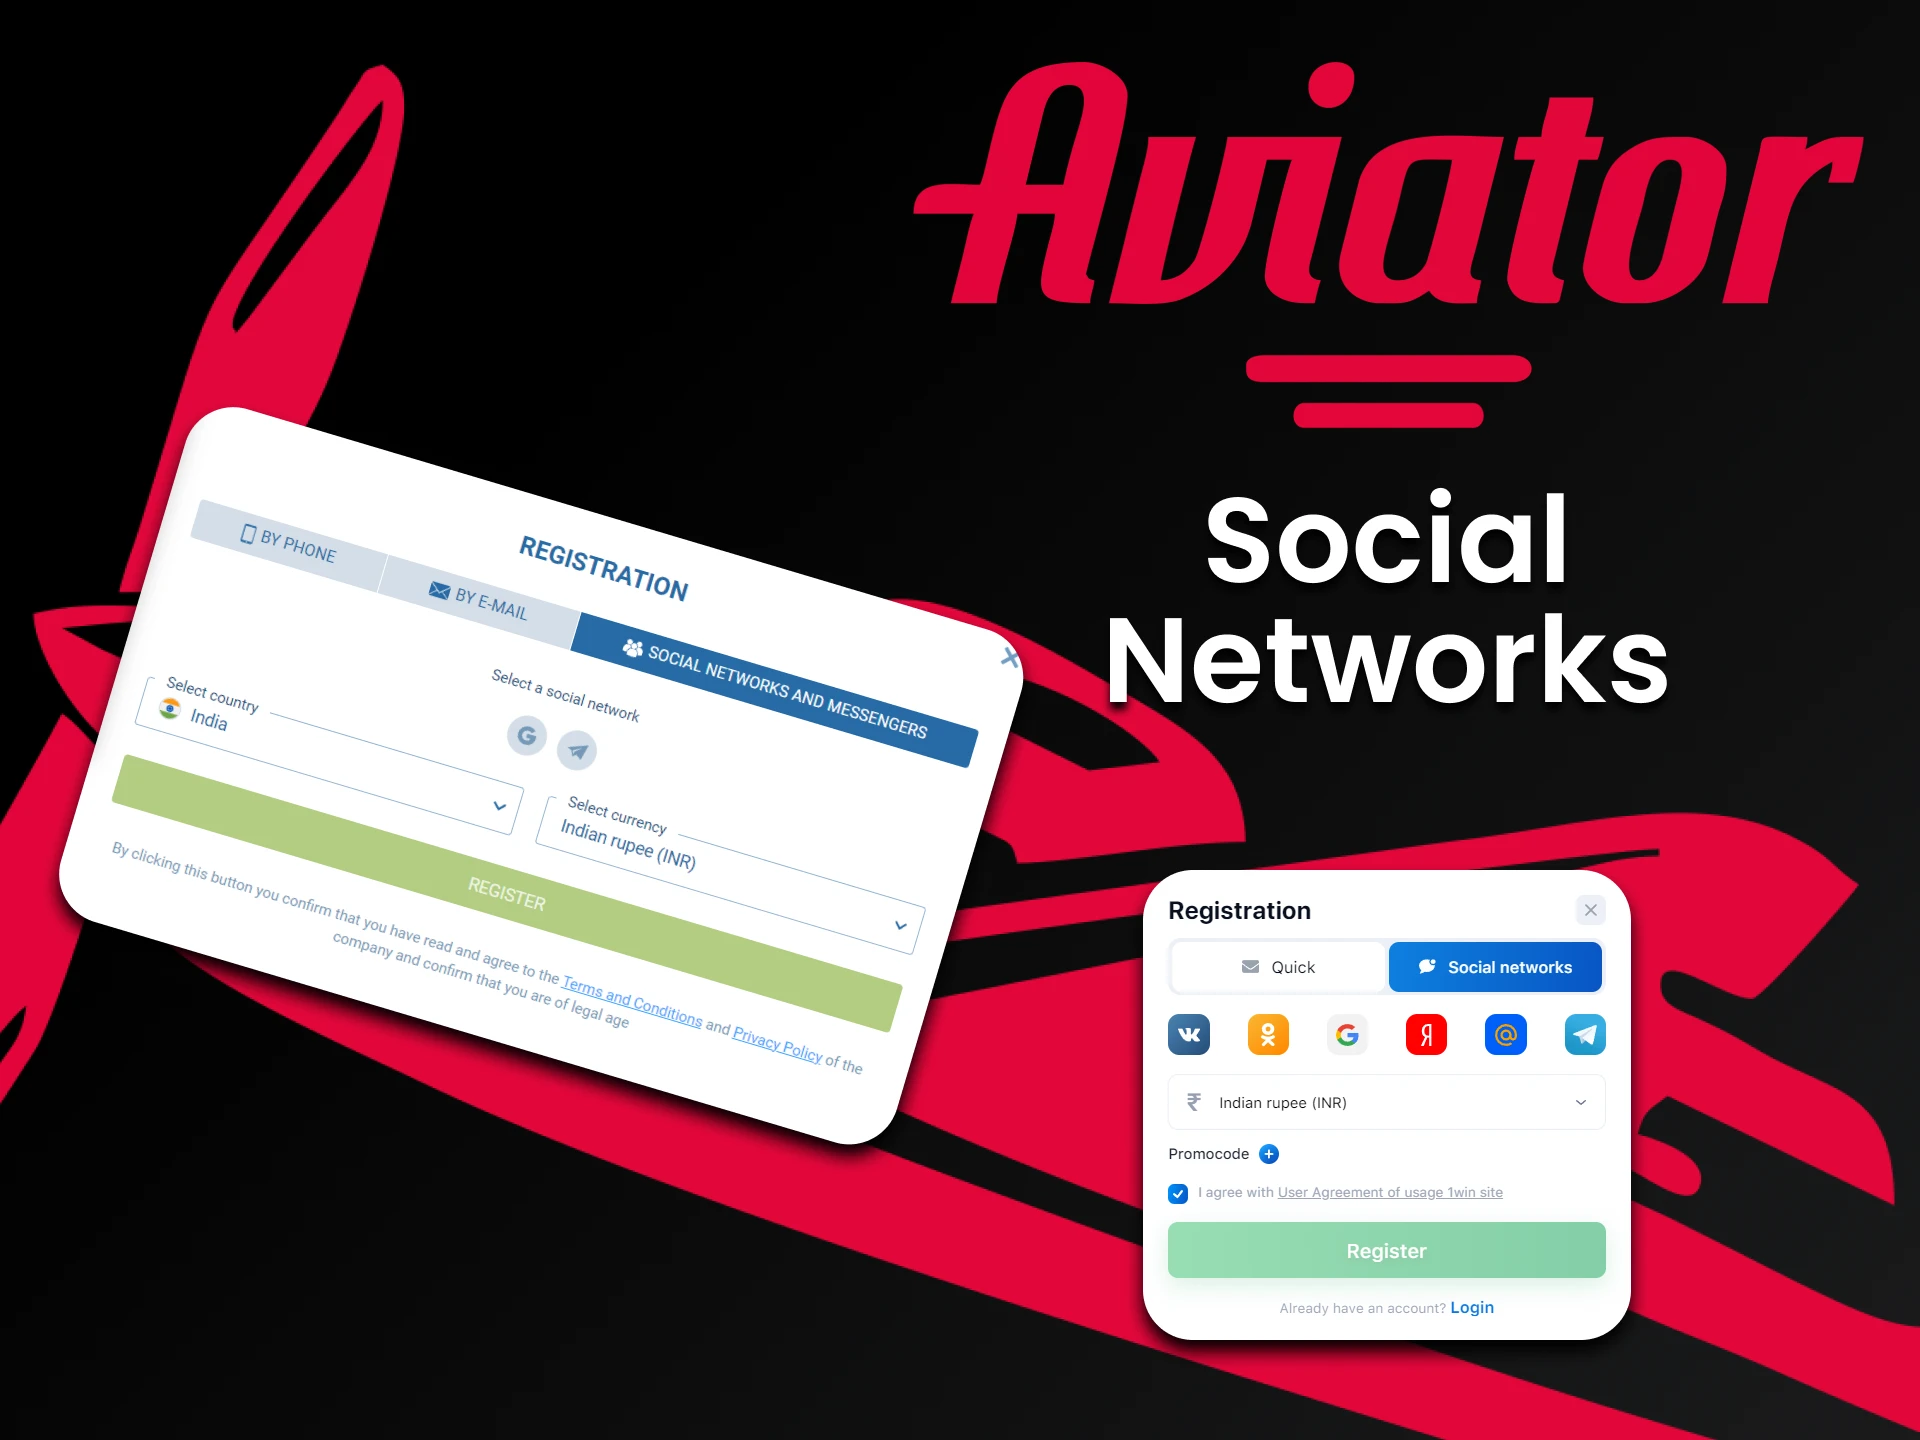 You can create an account via networks to play Aviator.